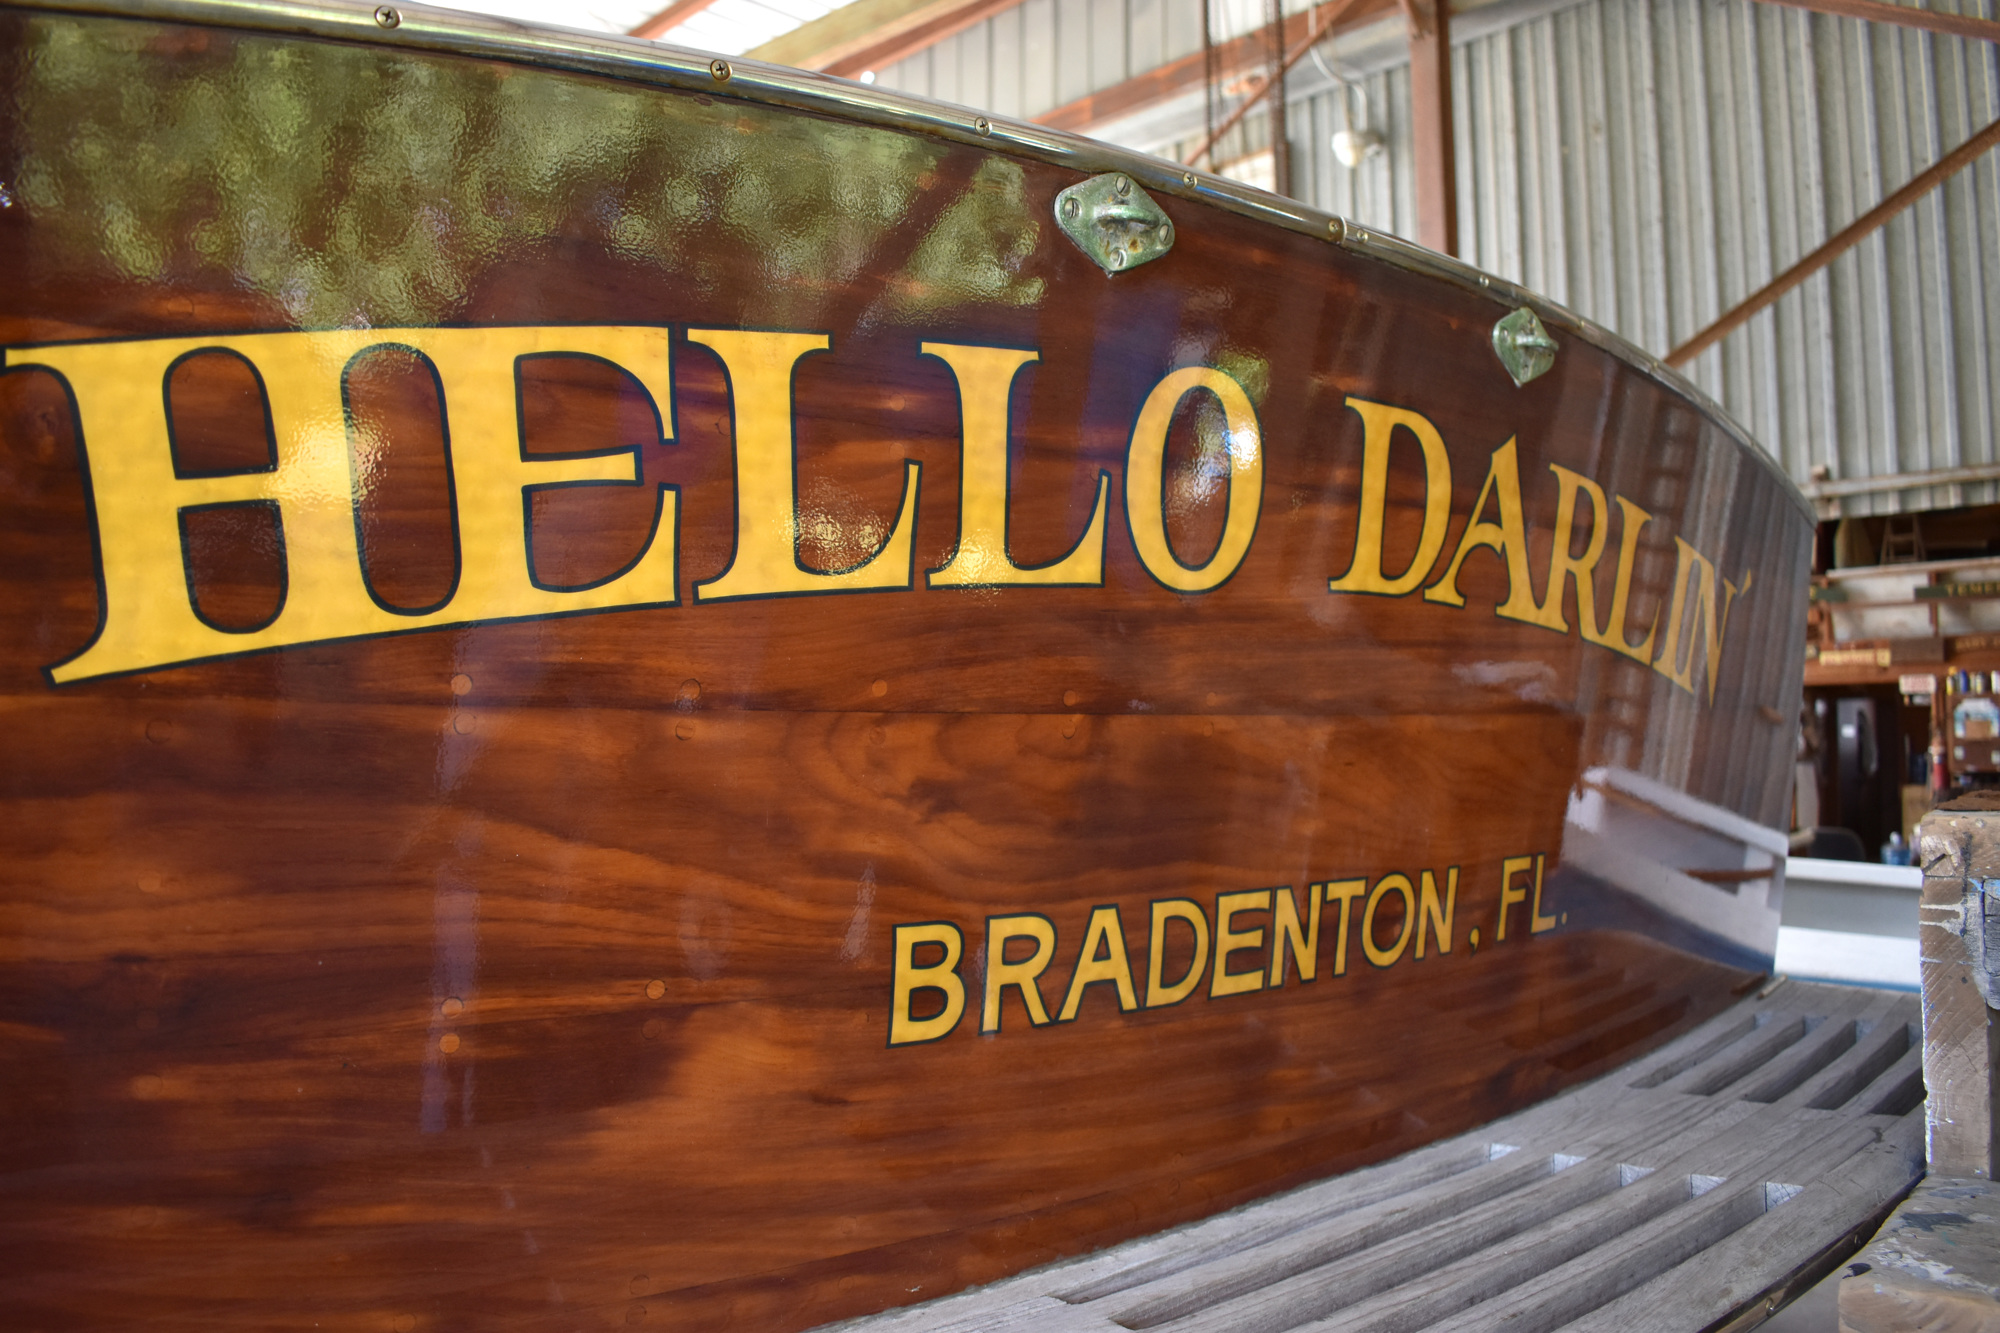 One of the old boats sitting in George Luzier’s shop was named after the favorite phrase of his childhood friend Bill Hebb, who used to shout “Hello darlin!” to get the attention of girls when they were growing up.